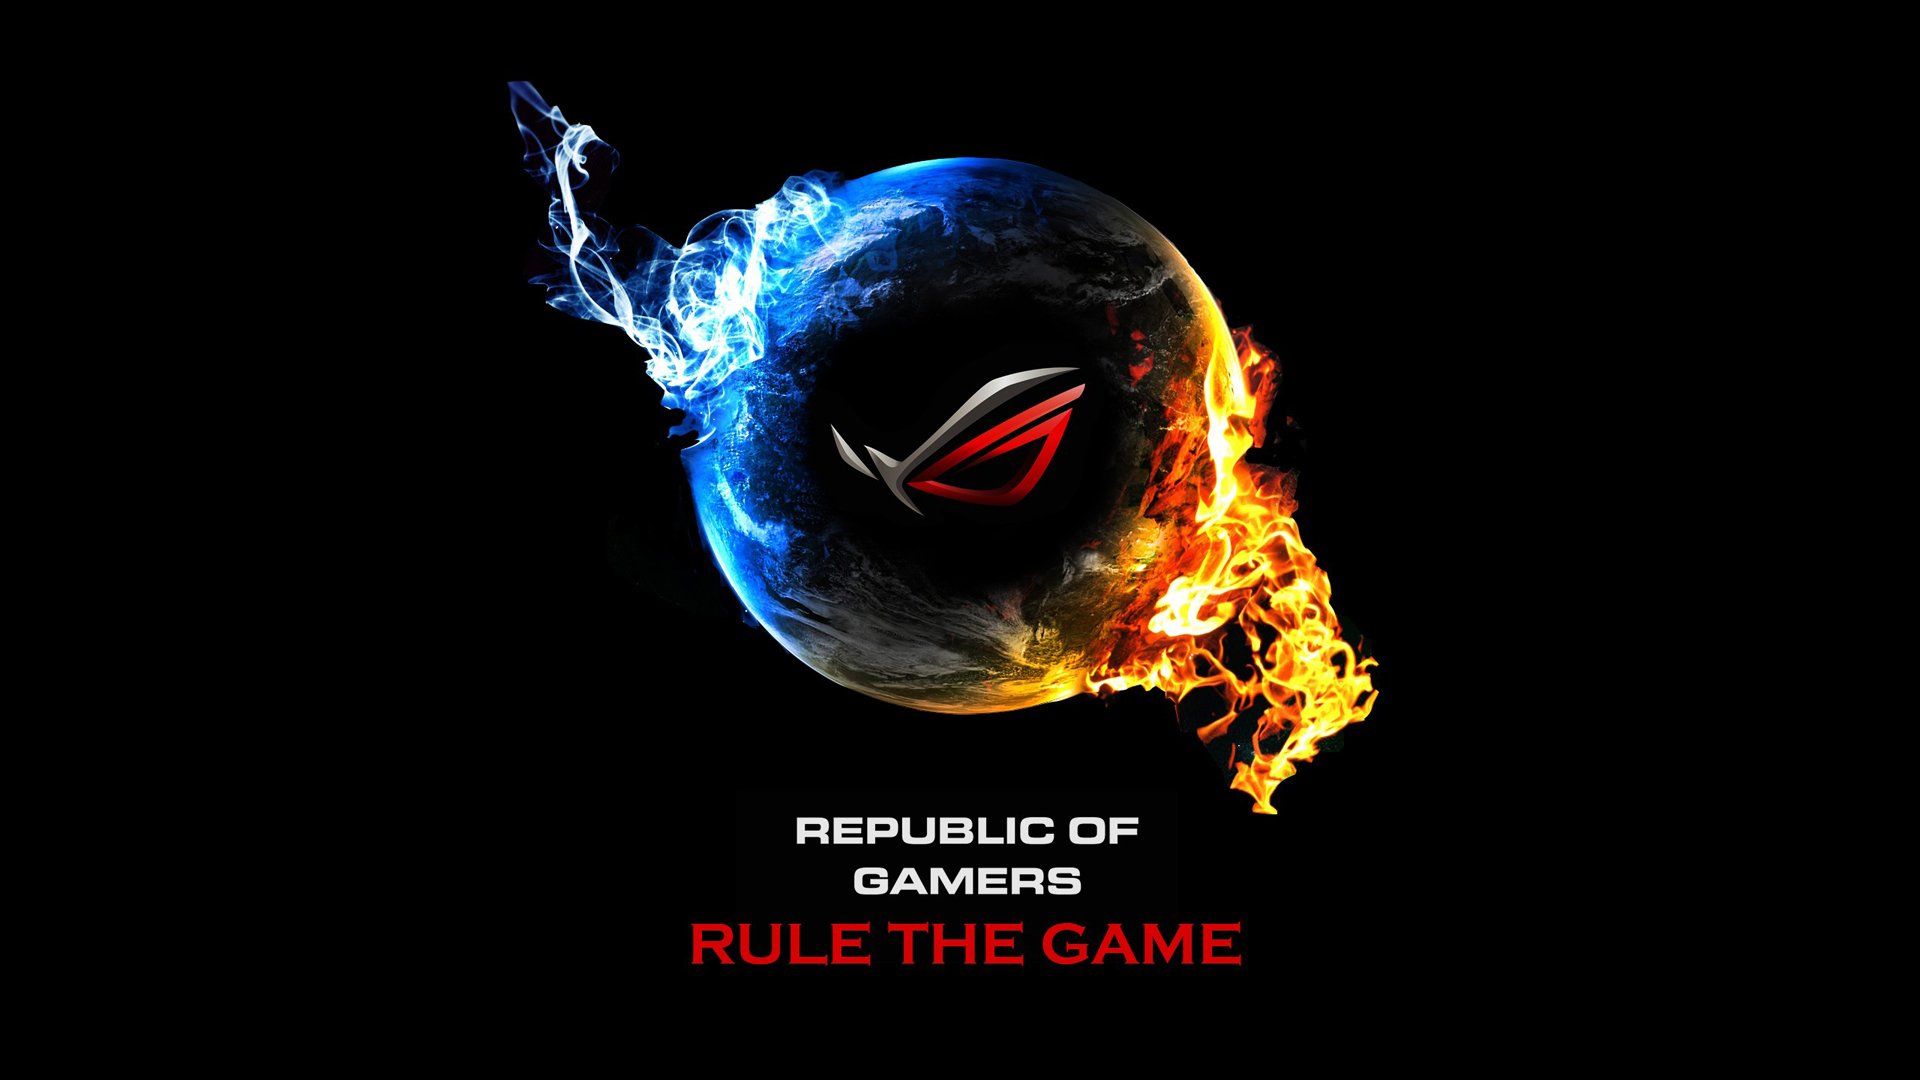 Asus Republic Gamers Computer Game Wallpapers Hd Desktop And Mobile Backgrounds